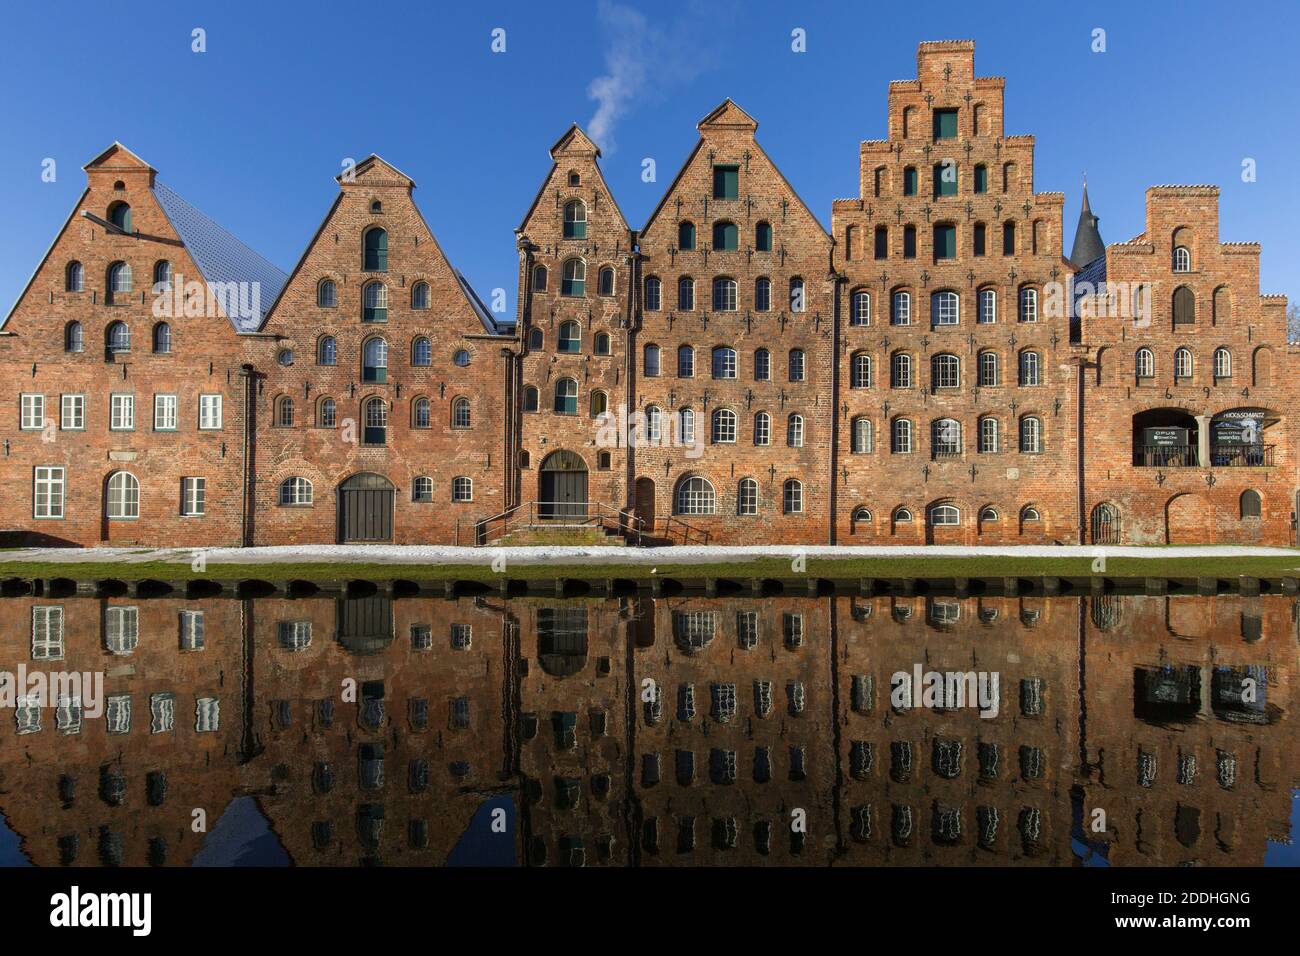 Salzspeicher / salt storehouses in winter along the Upper Trave River in the Hanseatic town Lübeck / Luebeck, Schleswig-Holstein, Germany Stock Photo